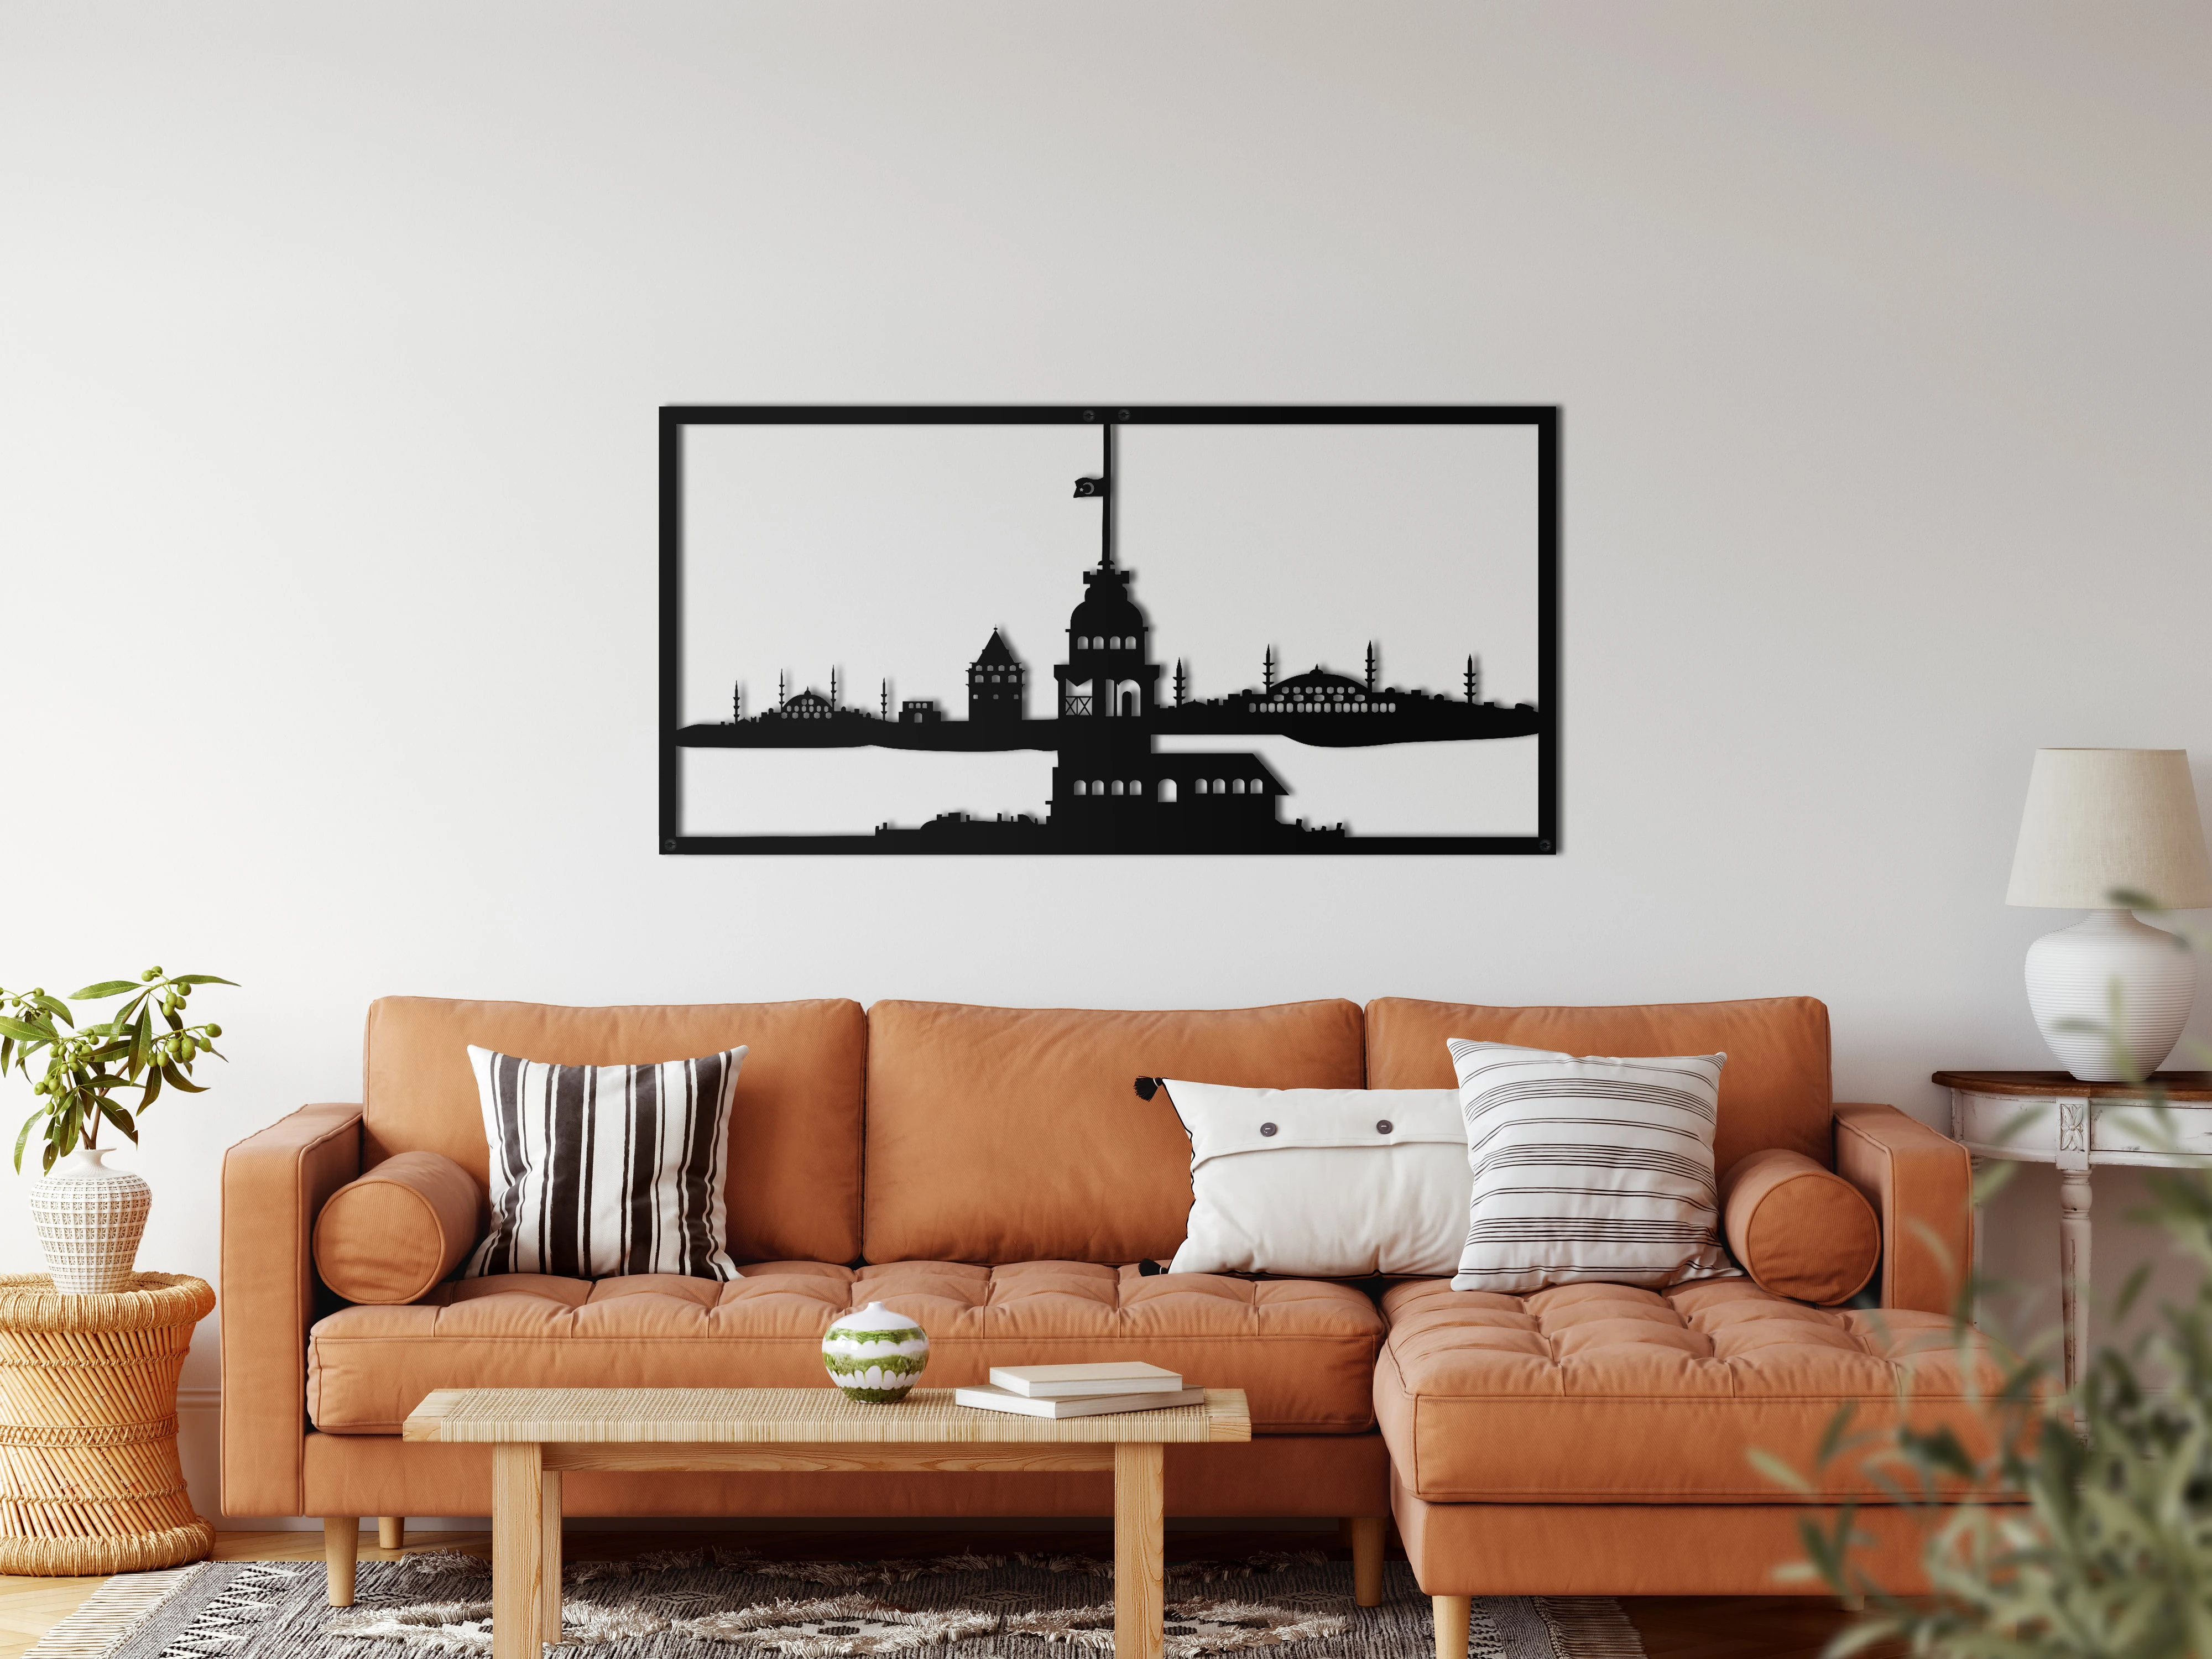 

Metal Wall Art, The Maiden's Tower in Istanbul, Metal Wall Decor, Home Interior Decoration, Living Room Decor